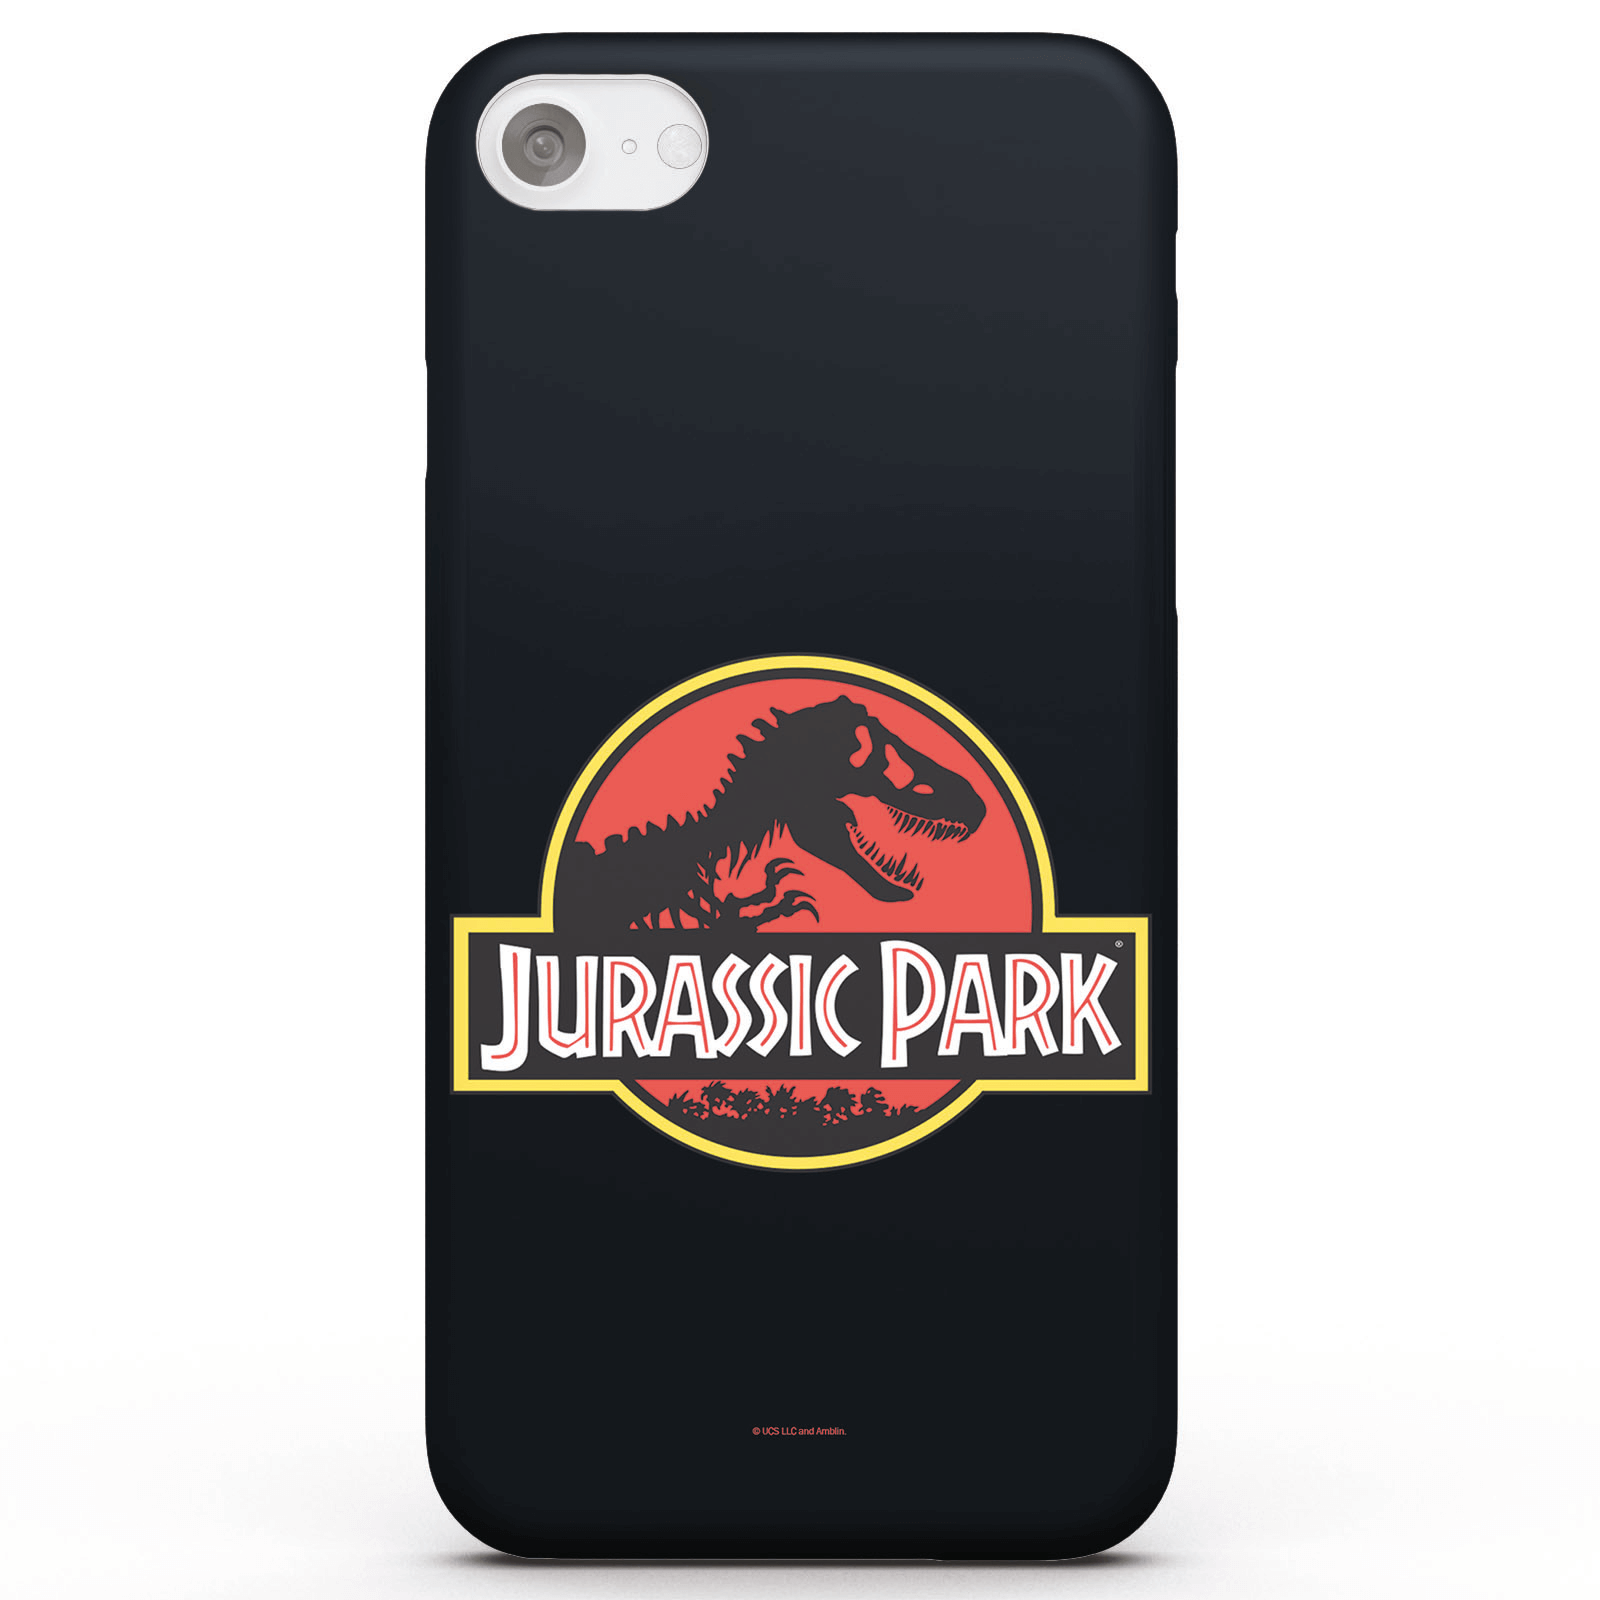 Photos - Case Jurassic Park Logo Phone  for iPhone and Android - iPhone 6S - Tough C